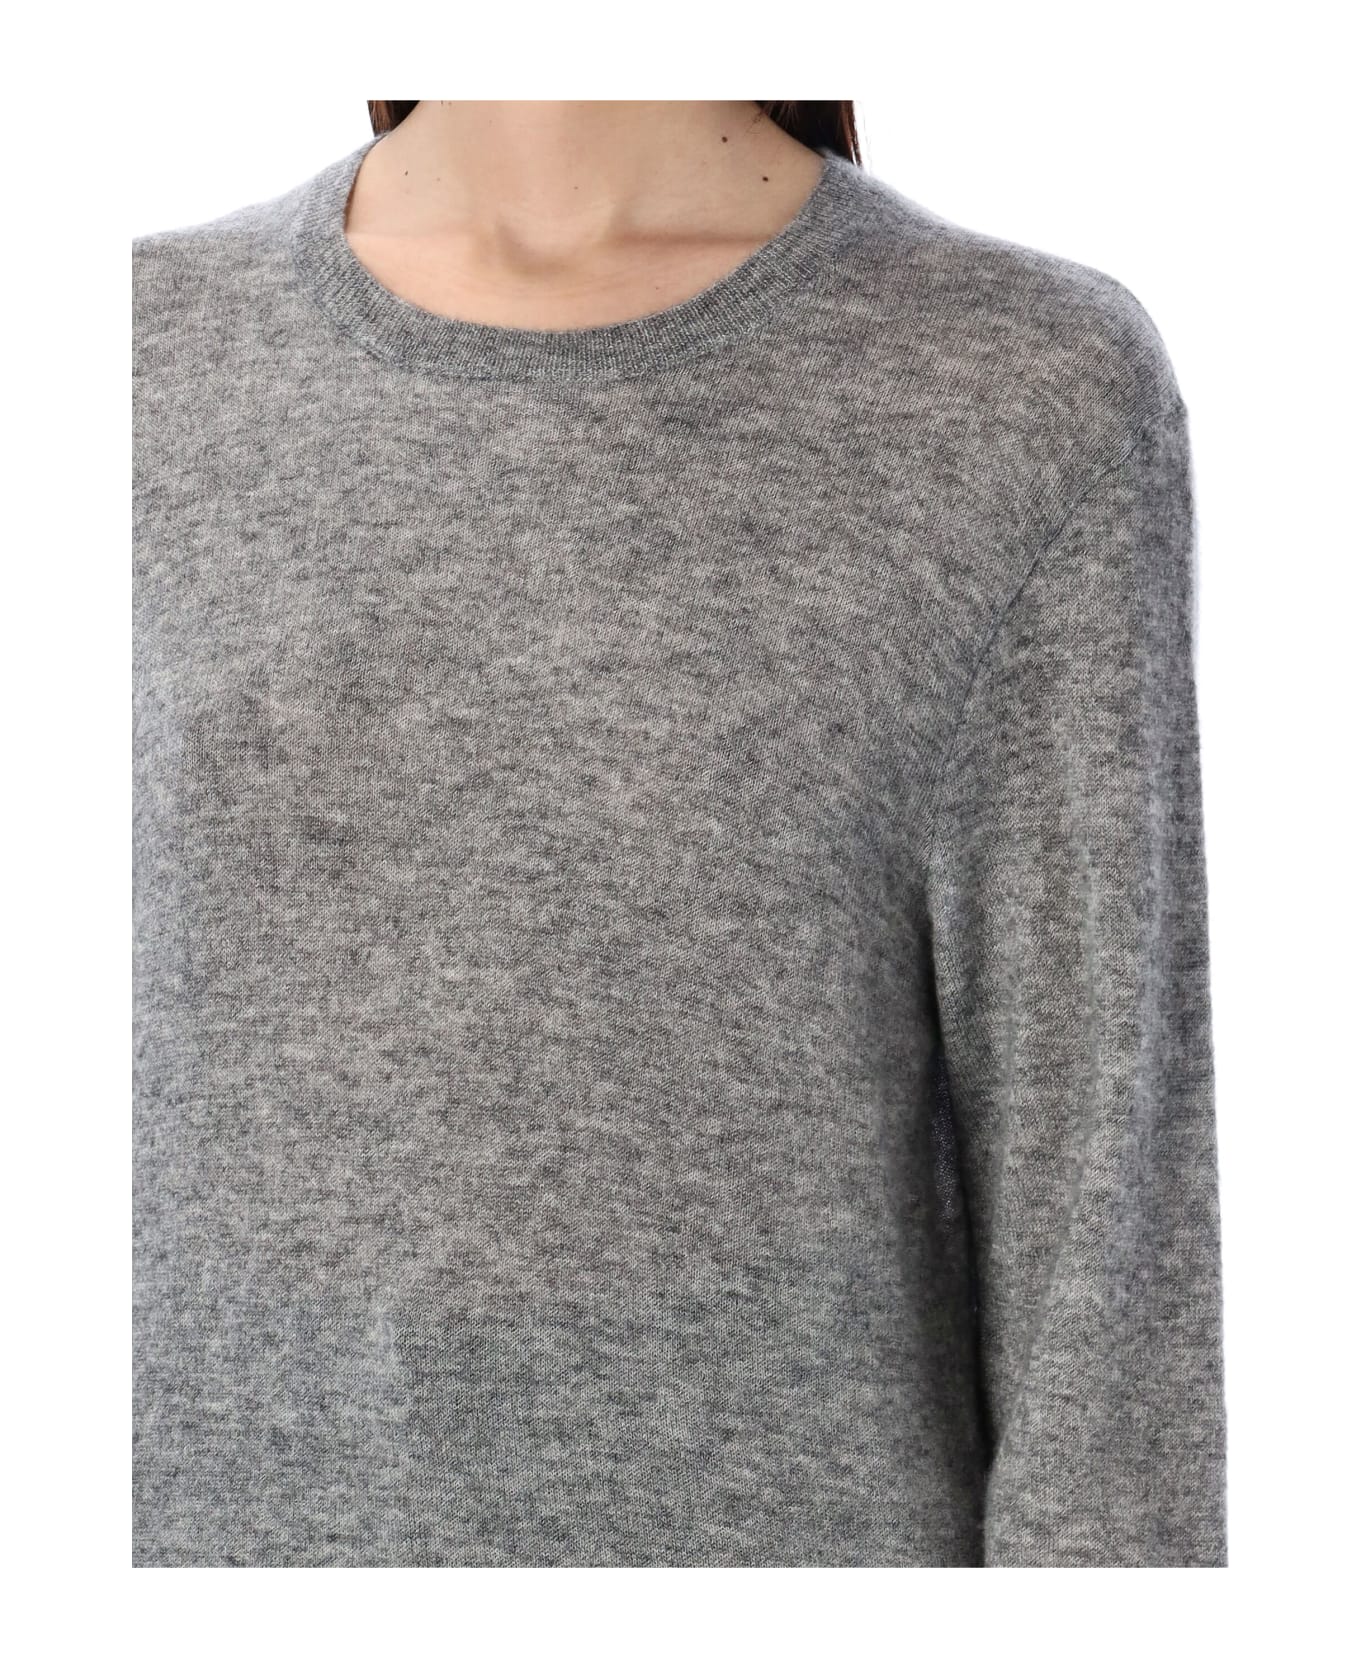 Saint Laurent Cashmere And Silk Sweater - GREY